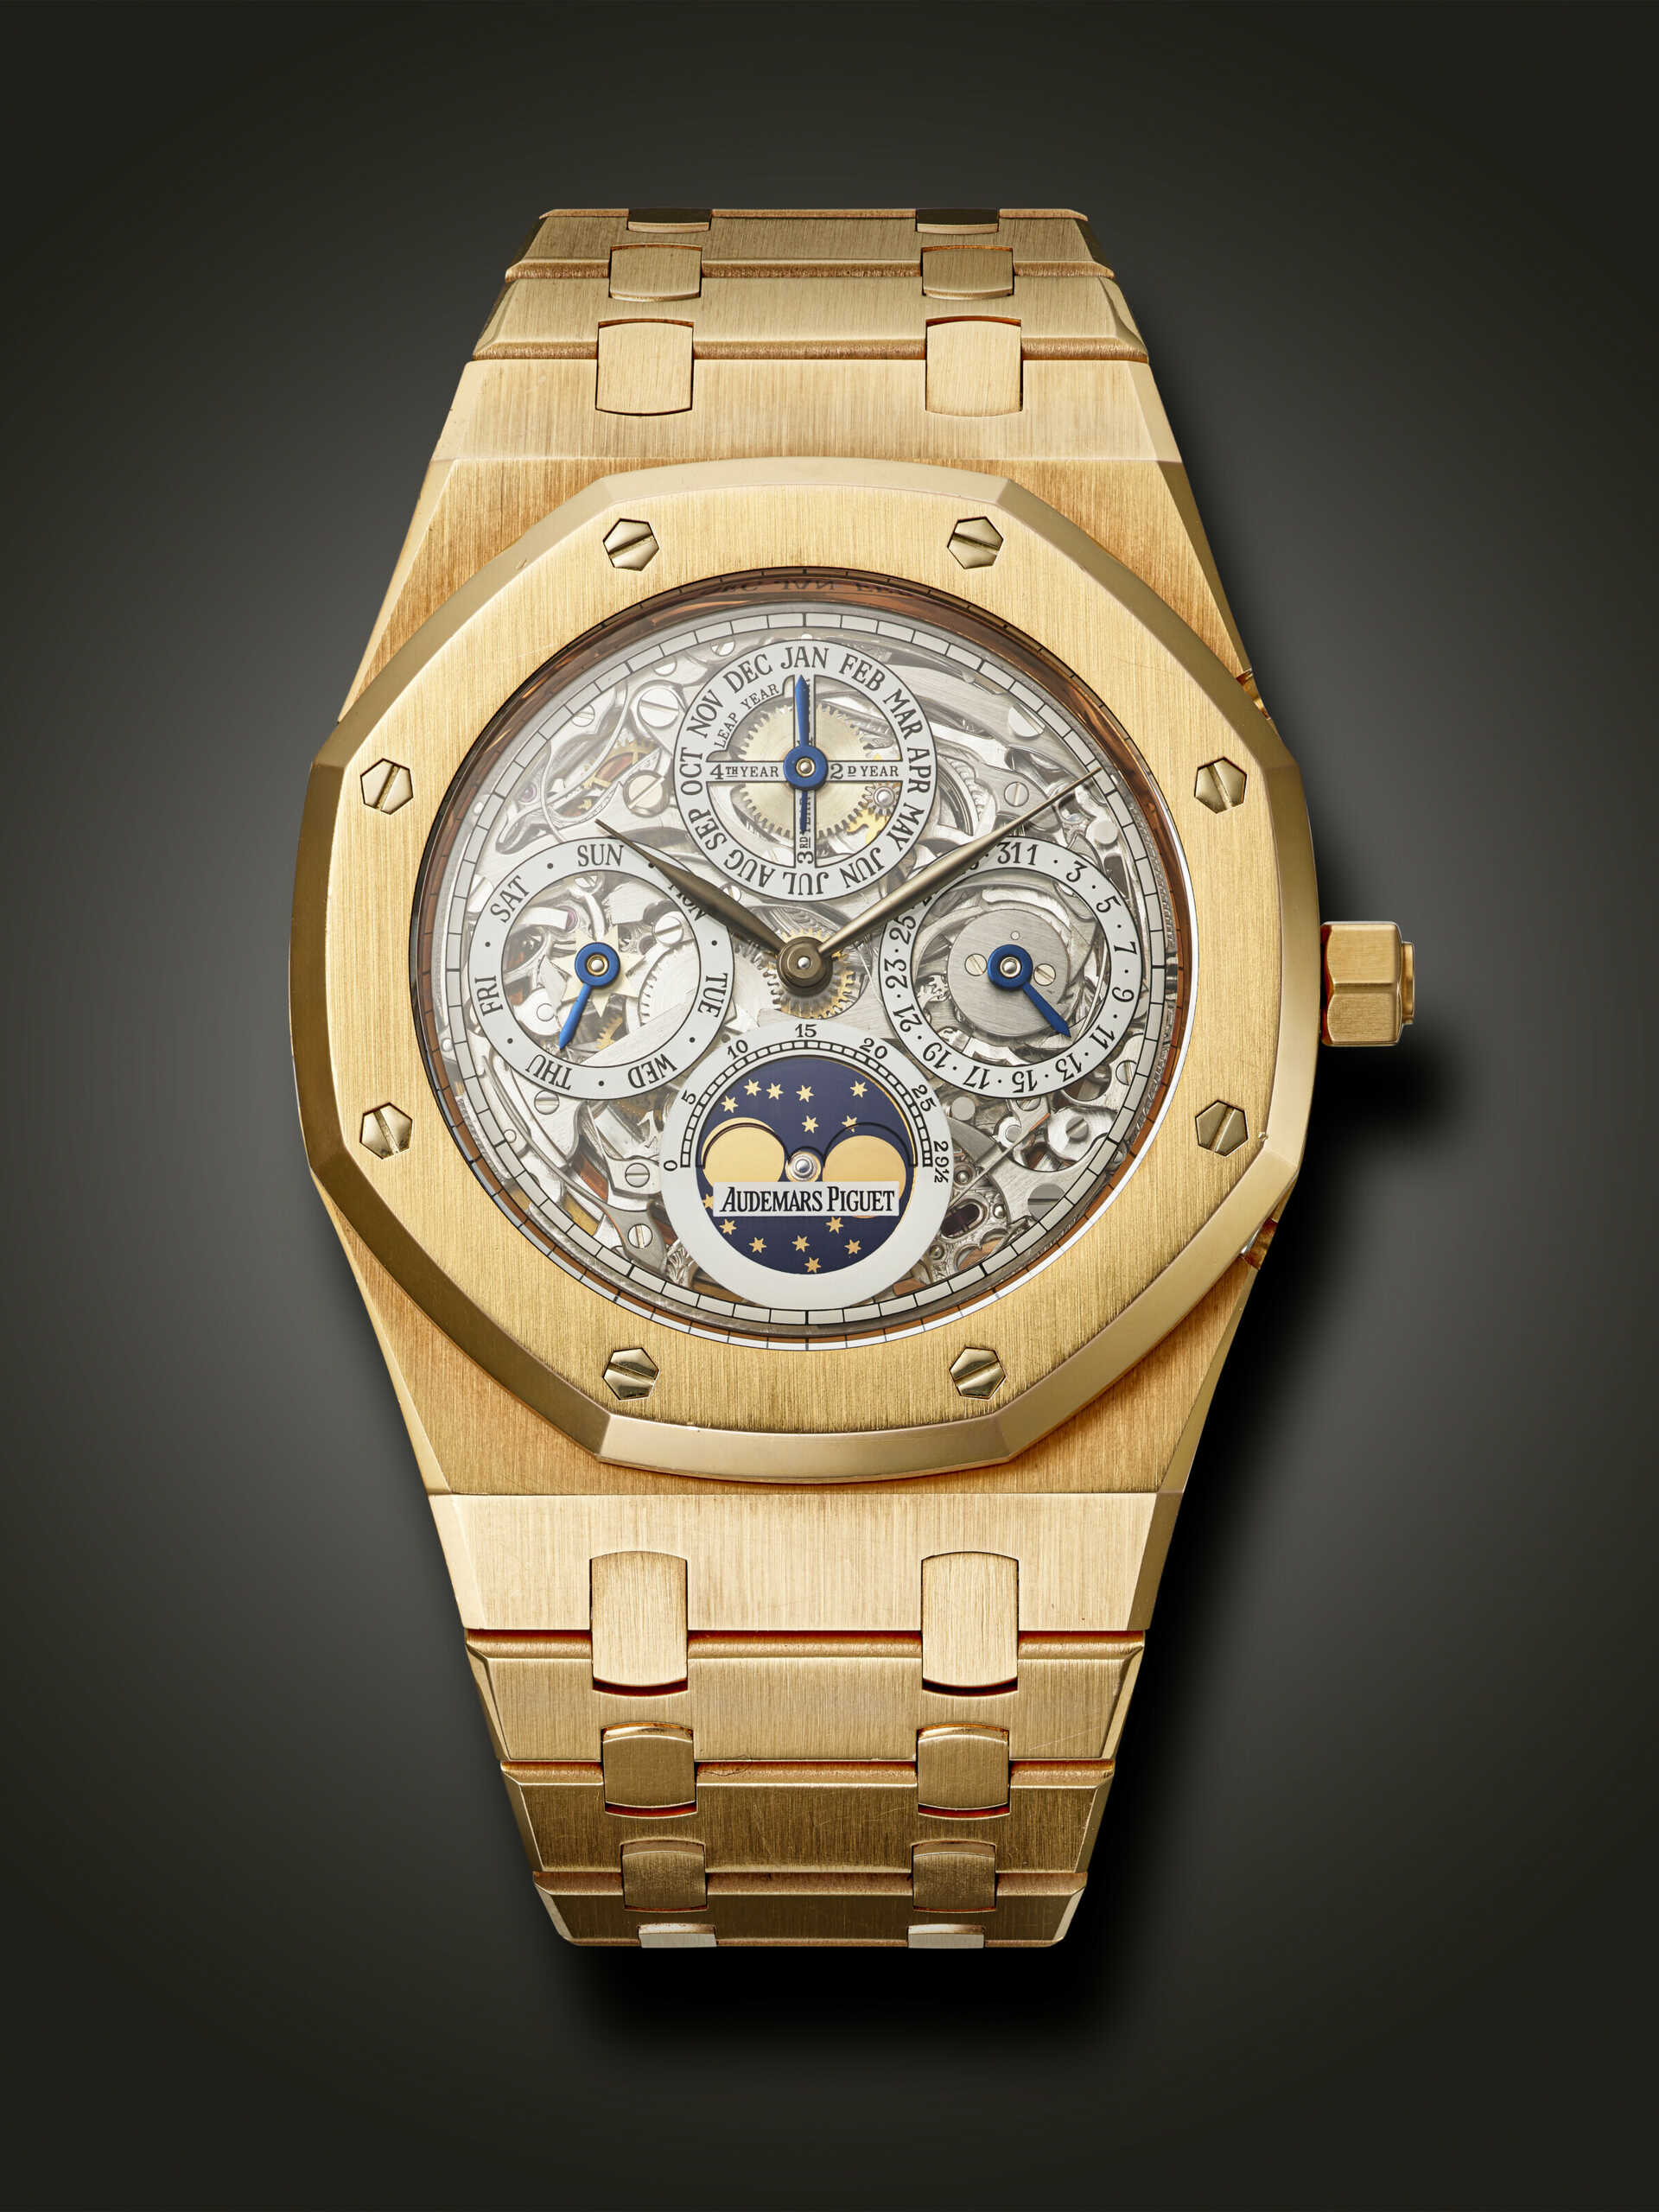 AUDEMARS PIGUET, RARE PINK GOLD SKELETONIZED PERPETUAL CALENDAR 'ROYAL OAK' WITH MOON PHASES, REF. 25829OR